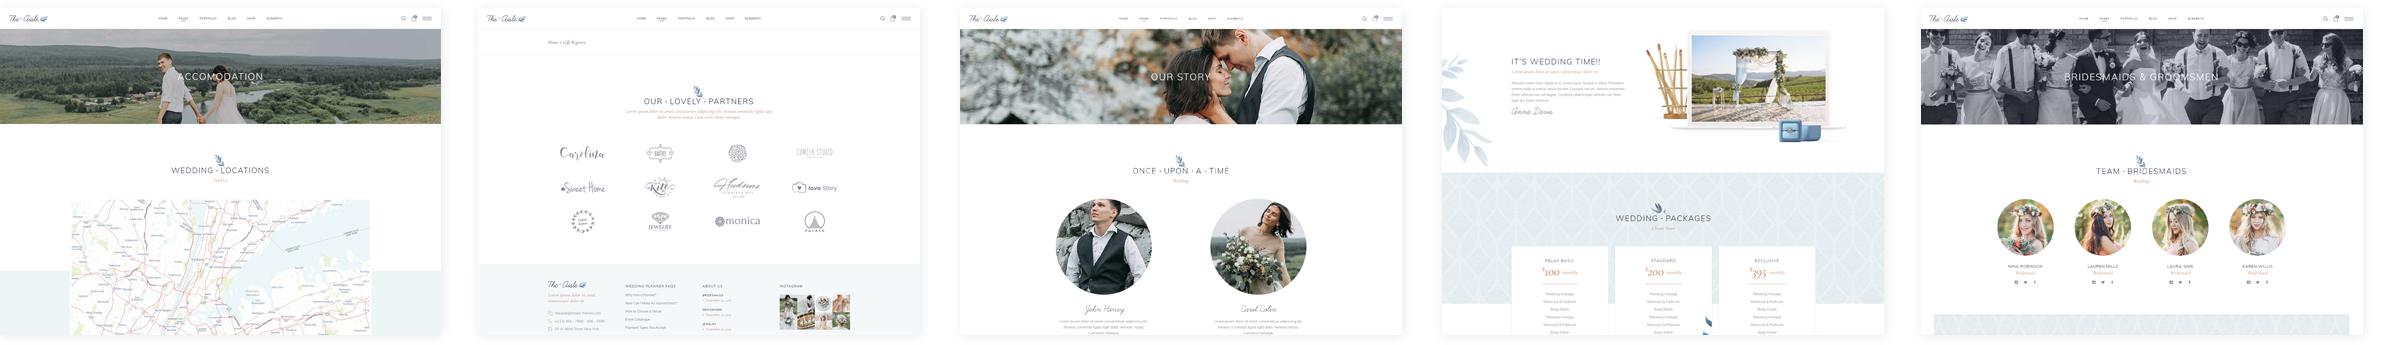 landing-innerpages-1